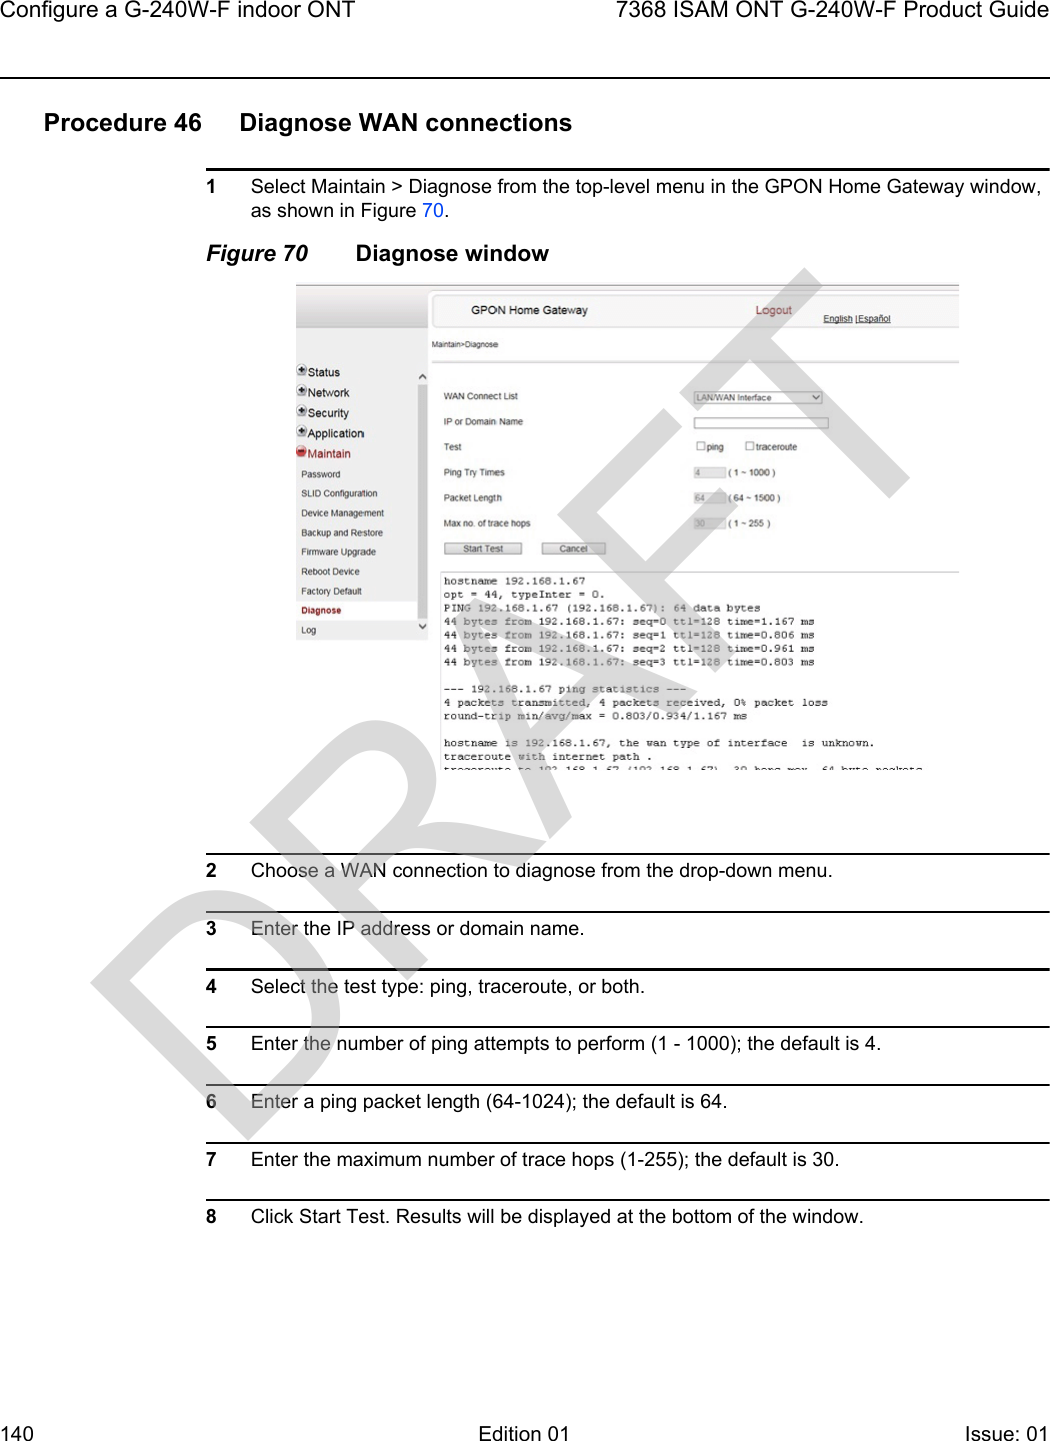 Configure a G-240W-F indoor ONT1407368 ISAM ONT G-240W-F Product GuideEdition 01 Issue: 01 Procedure 46 Diagnose WAN connections1Select Maintain &gt; Diagnose from the top-level menu in the GPON Home Gateway window, as shown in Figure 70. Figure 70 Diagnose window2Choose a WAN connection to diagnose from the drop-down menu.3Enter the IP address or domain name.4Select the test type: ping, traceroute, or both.5Enter the number of ping attempts to perform (1 - 1000); the default is 4.6Enter a ping packet length (64-1024); the default is 64.7Enter the maximum number of trace hops (1-255); the default is 30.8Click Start Test. Results will be displayed at the bottom of the window.DRAFT